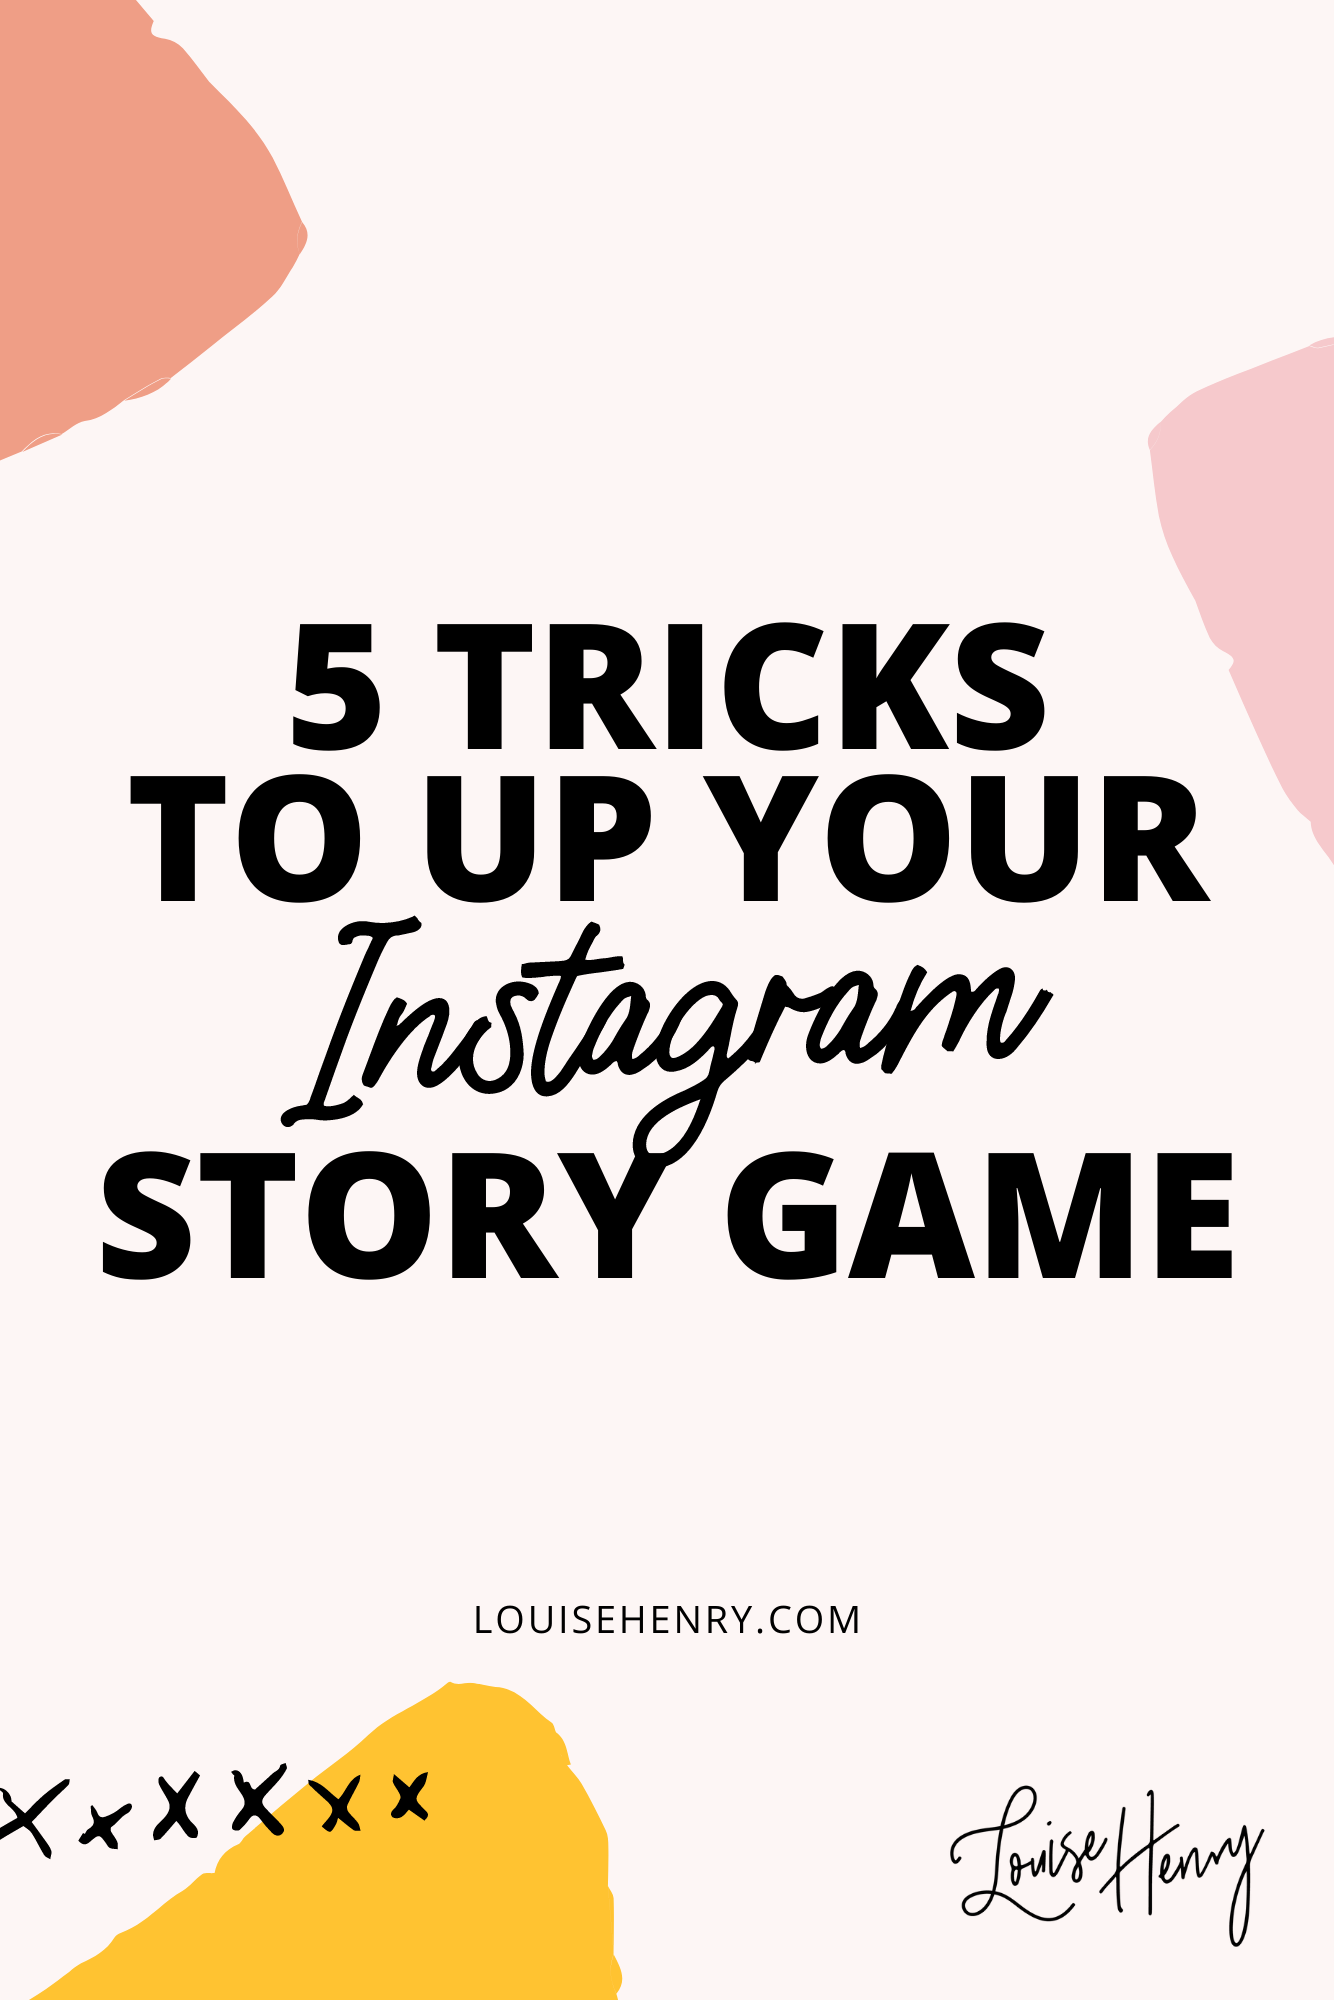 5 Tricks to Up Your Instagram Story Game - Instagram Stories Tricks ...